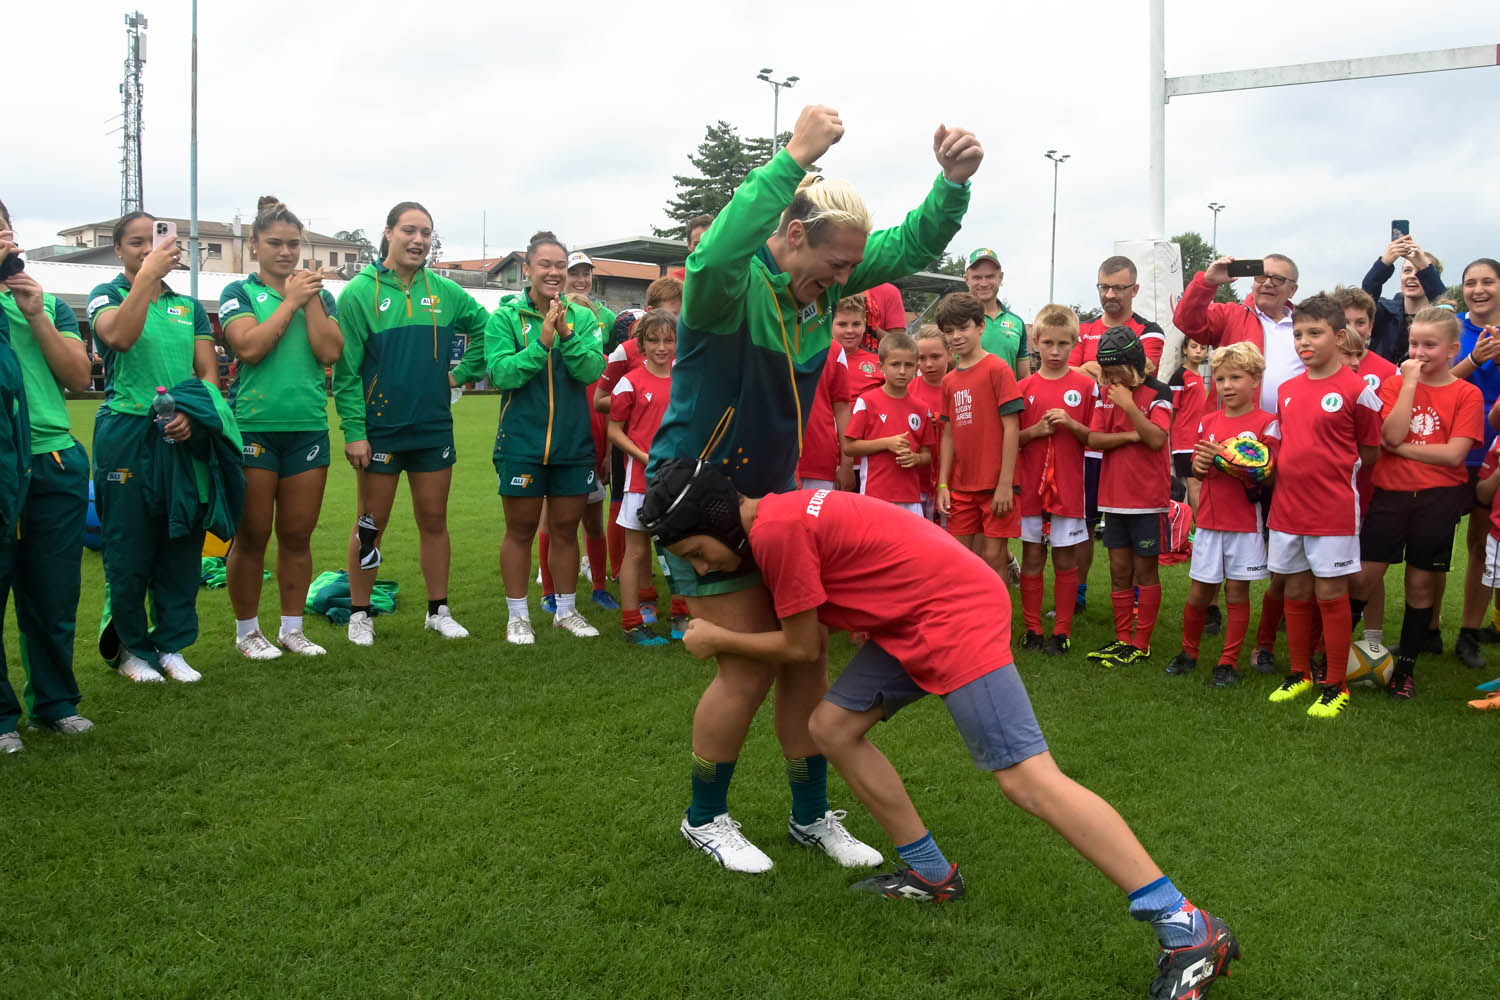 A child playfully tackles an adult rugby 7s player in front of a crowd.